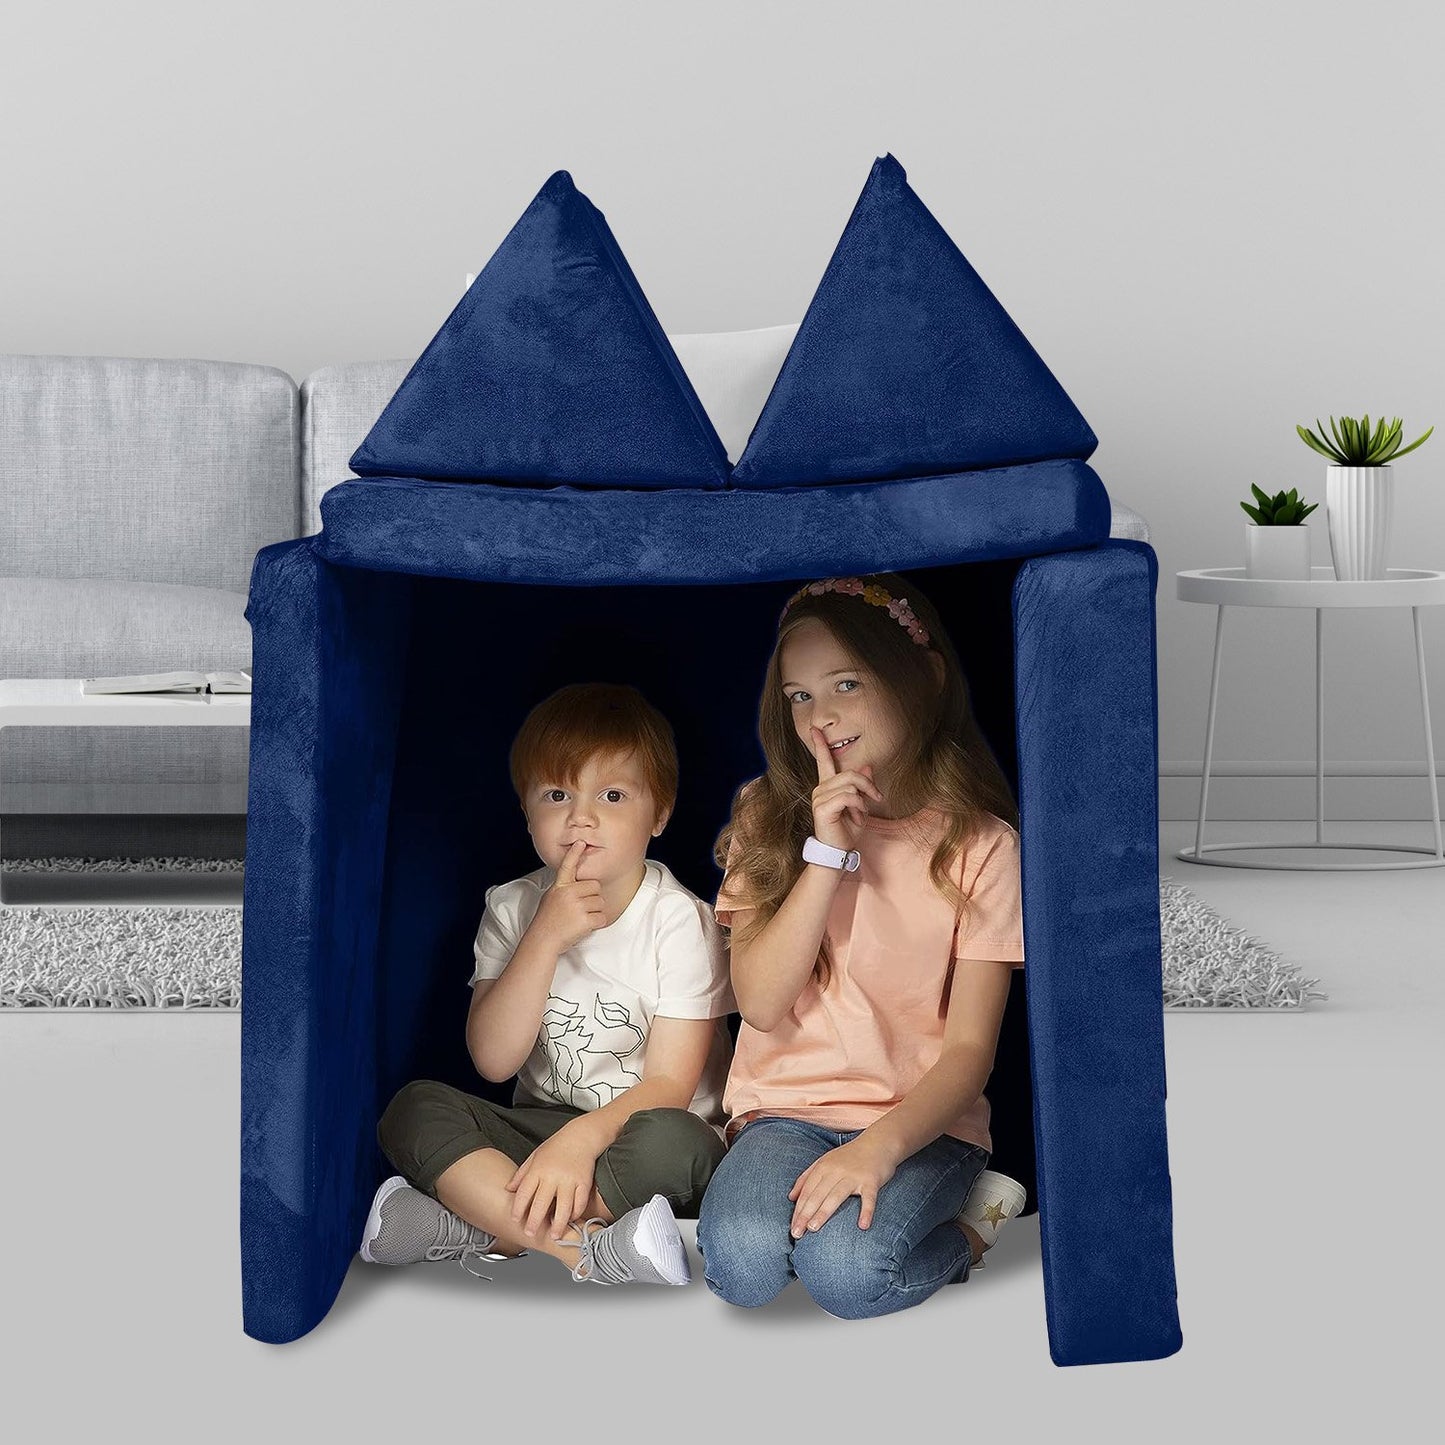 Huddle Kids Modular Play Foam Couch - Navy